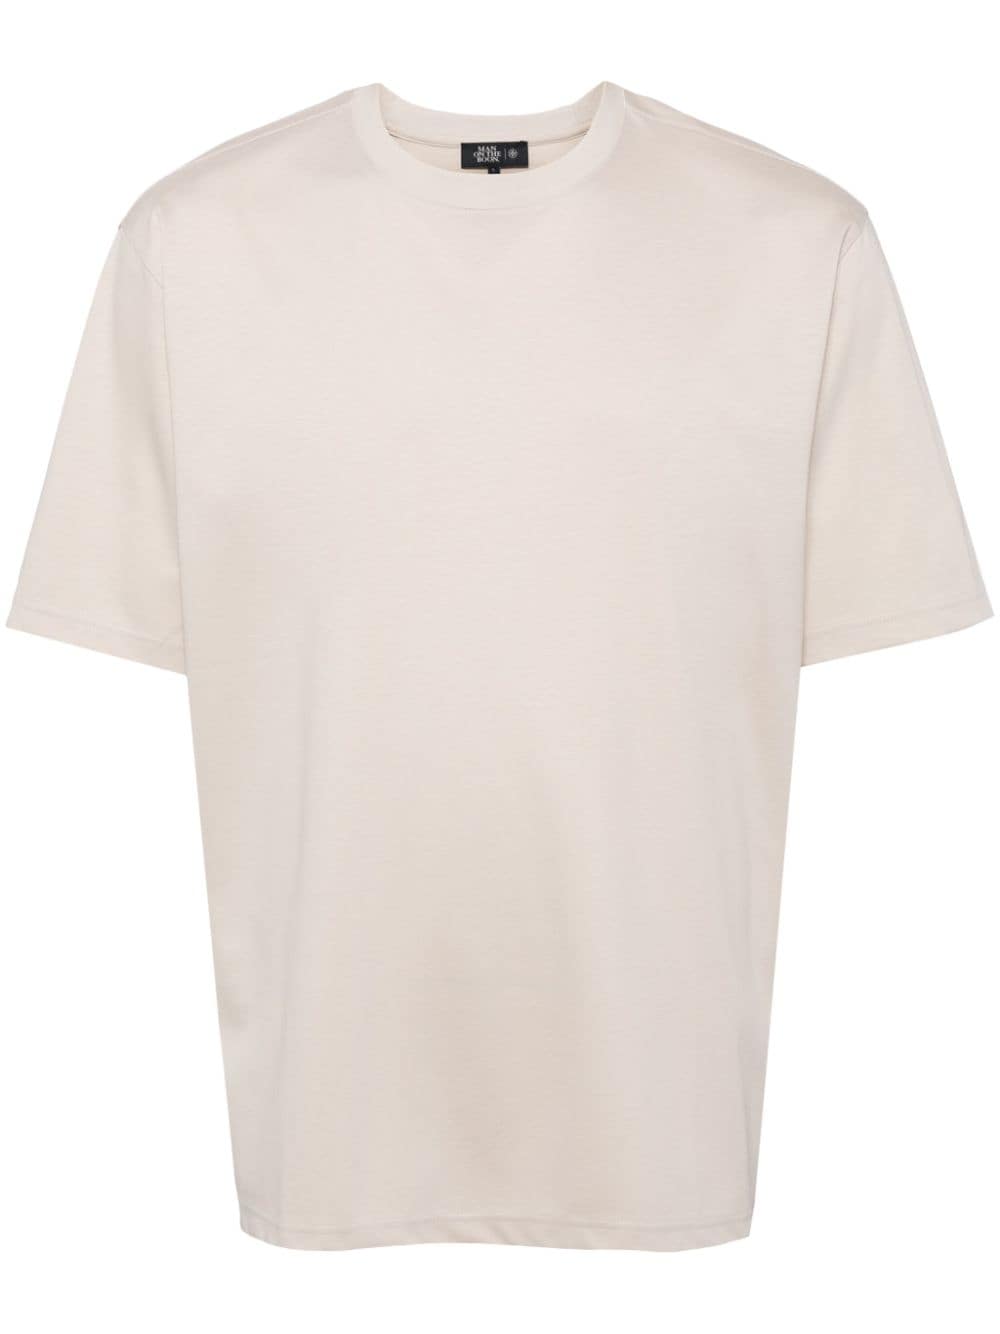 Man On The Boon. Glossy Crew-neck Cotton T-shirt In Neutrals